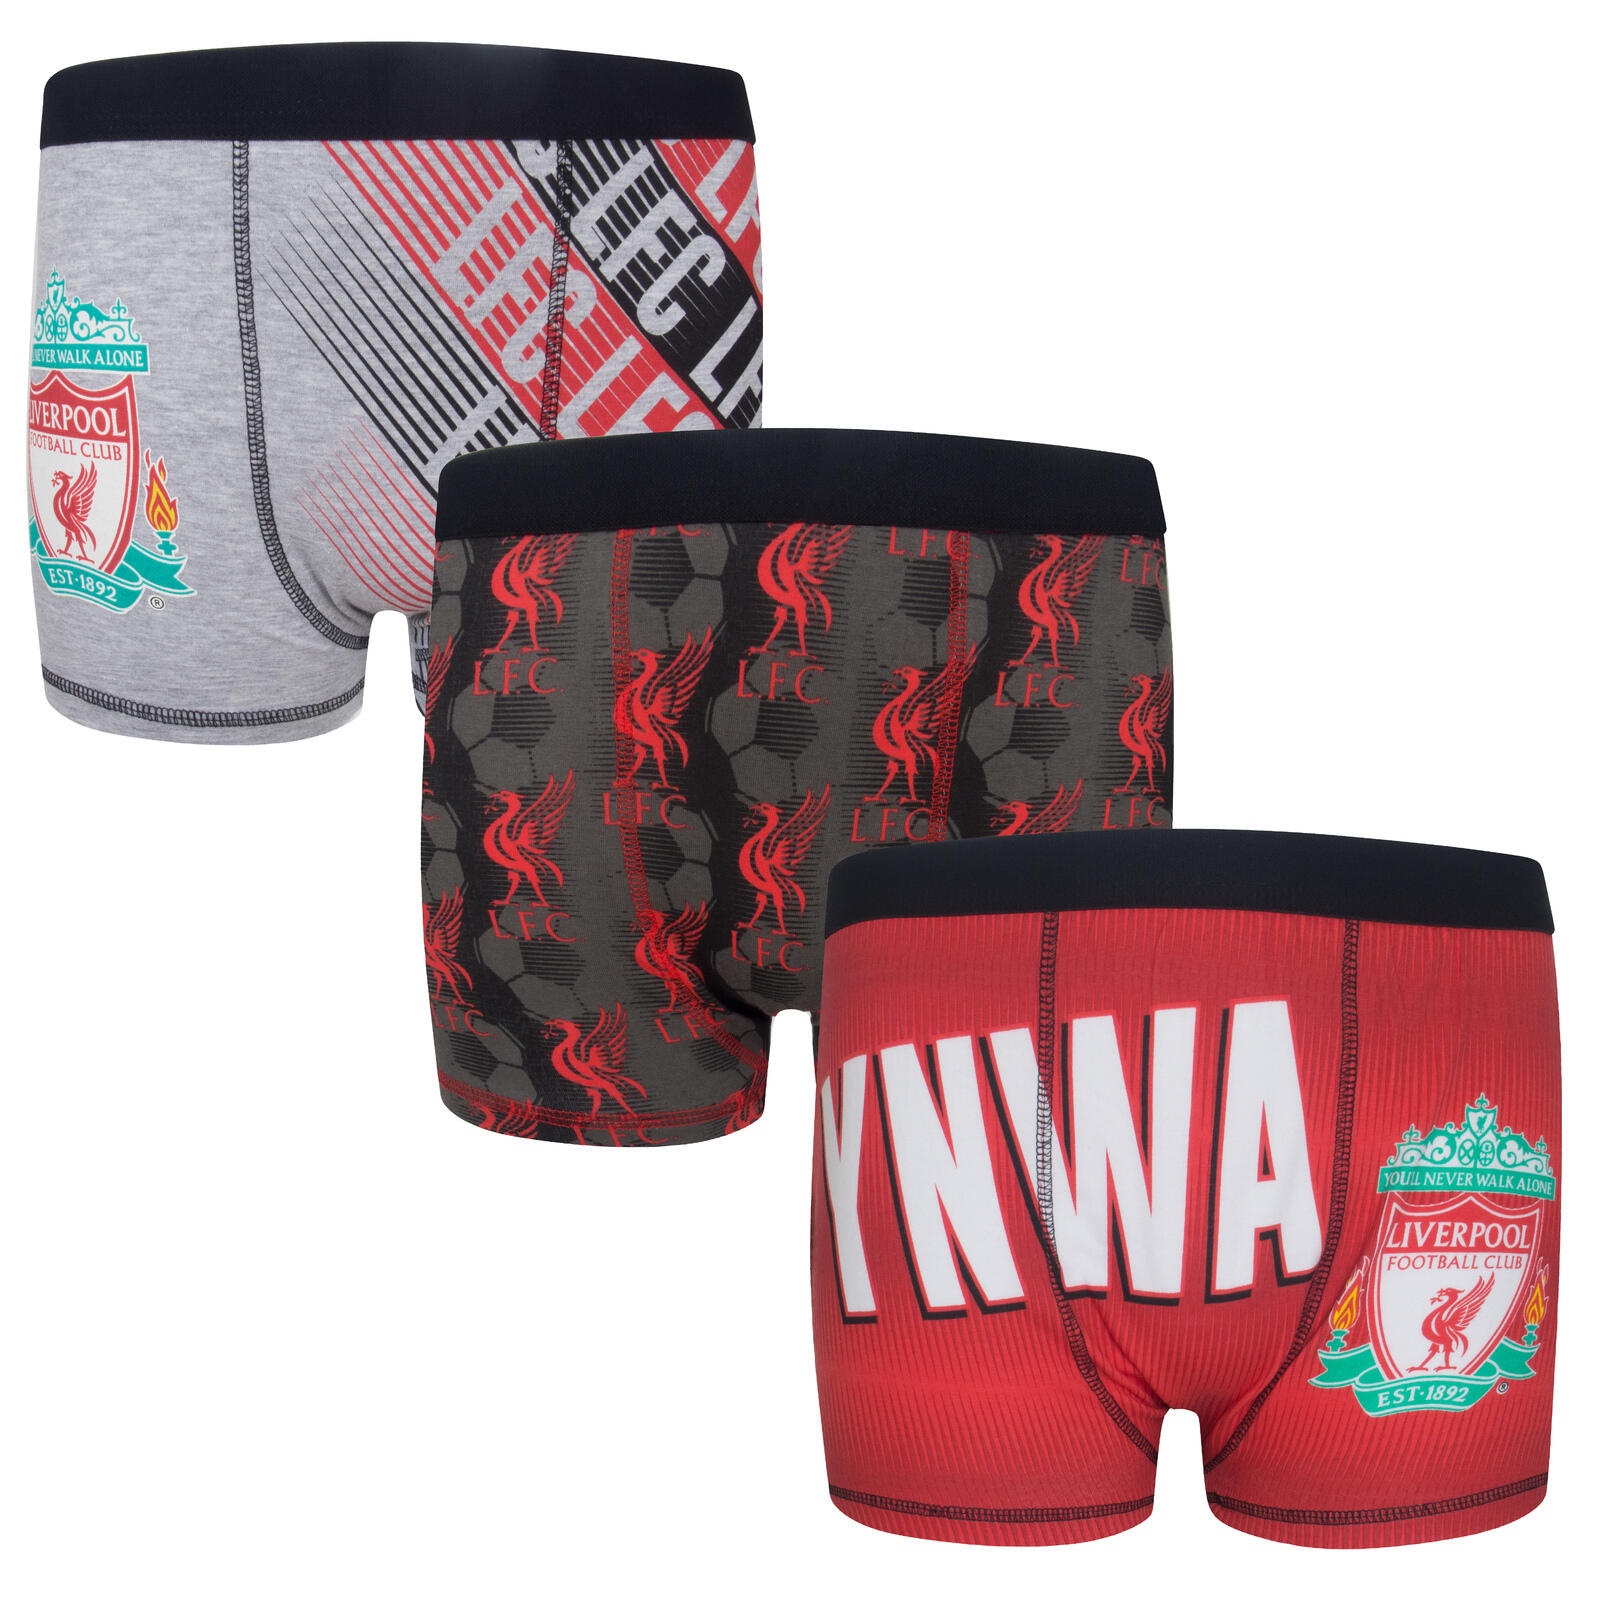 LIVERPOOL FC Liverpool FC Boys Boxer Shorts 3 Pack Crest Kids OFFICIAL Football Gift